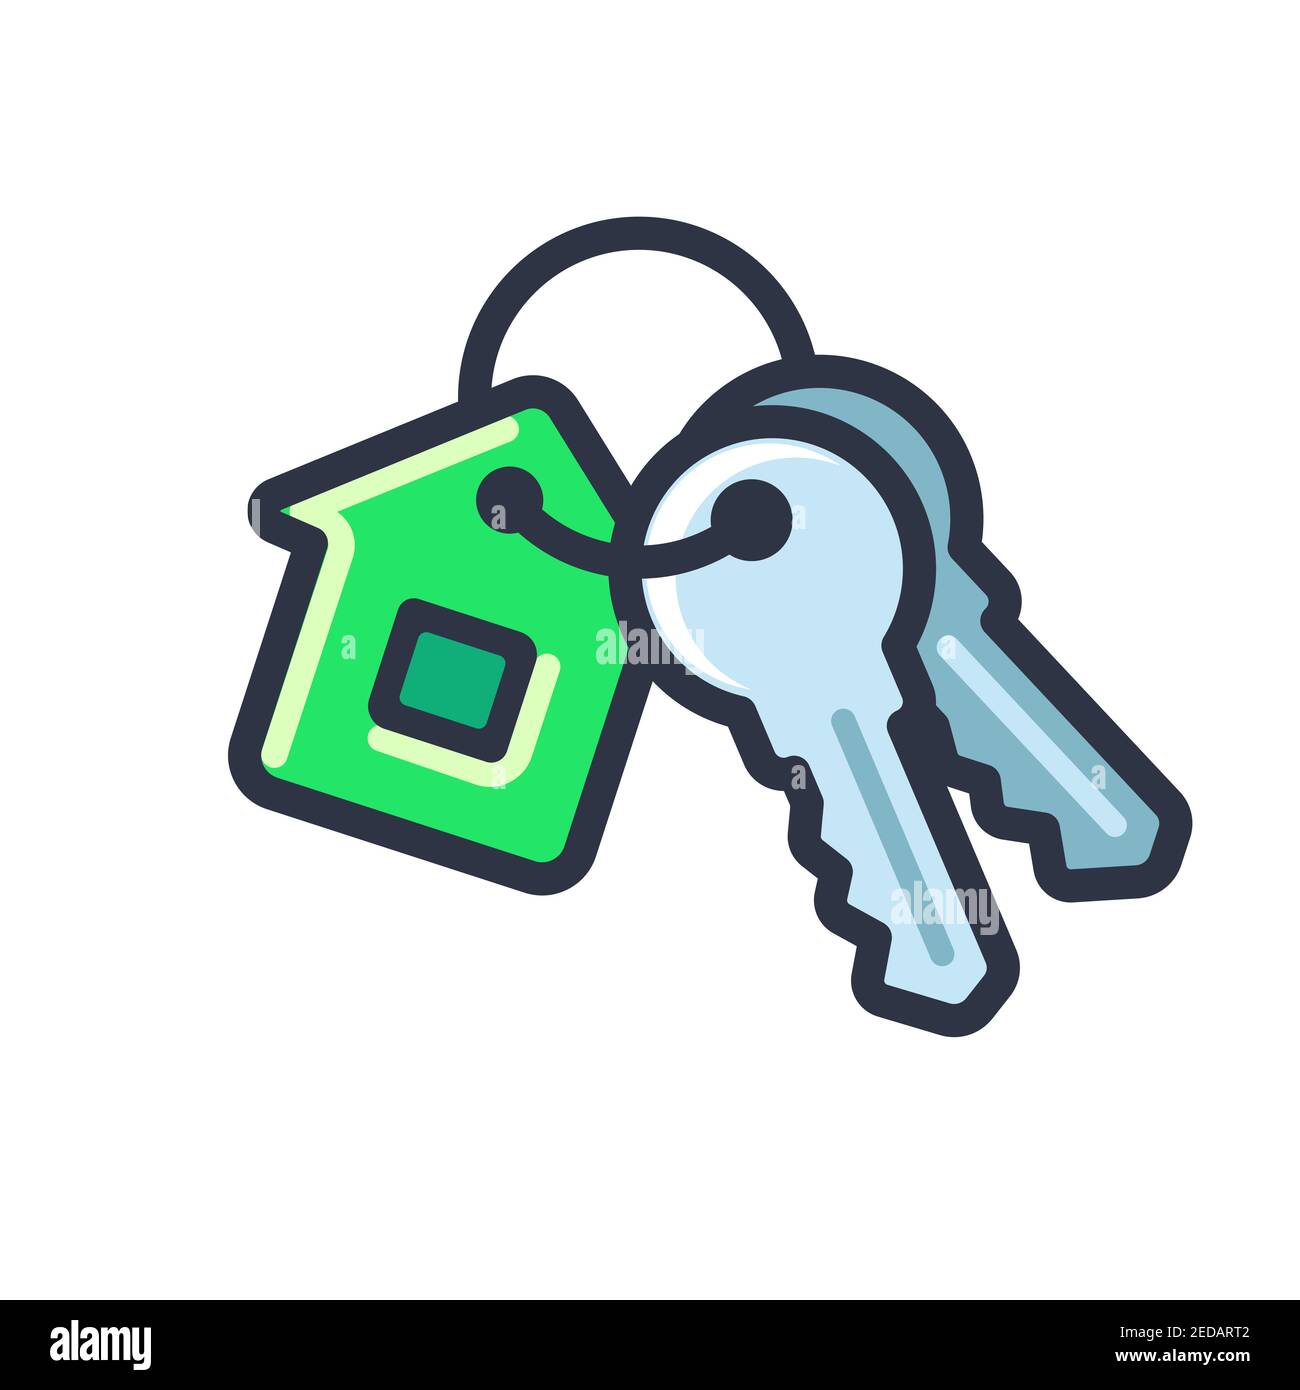 Cartoon house keys icon with house shaped key ring. New home symbol. Isolated vector clip art illustration. Stock Vector